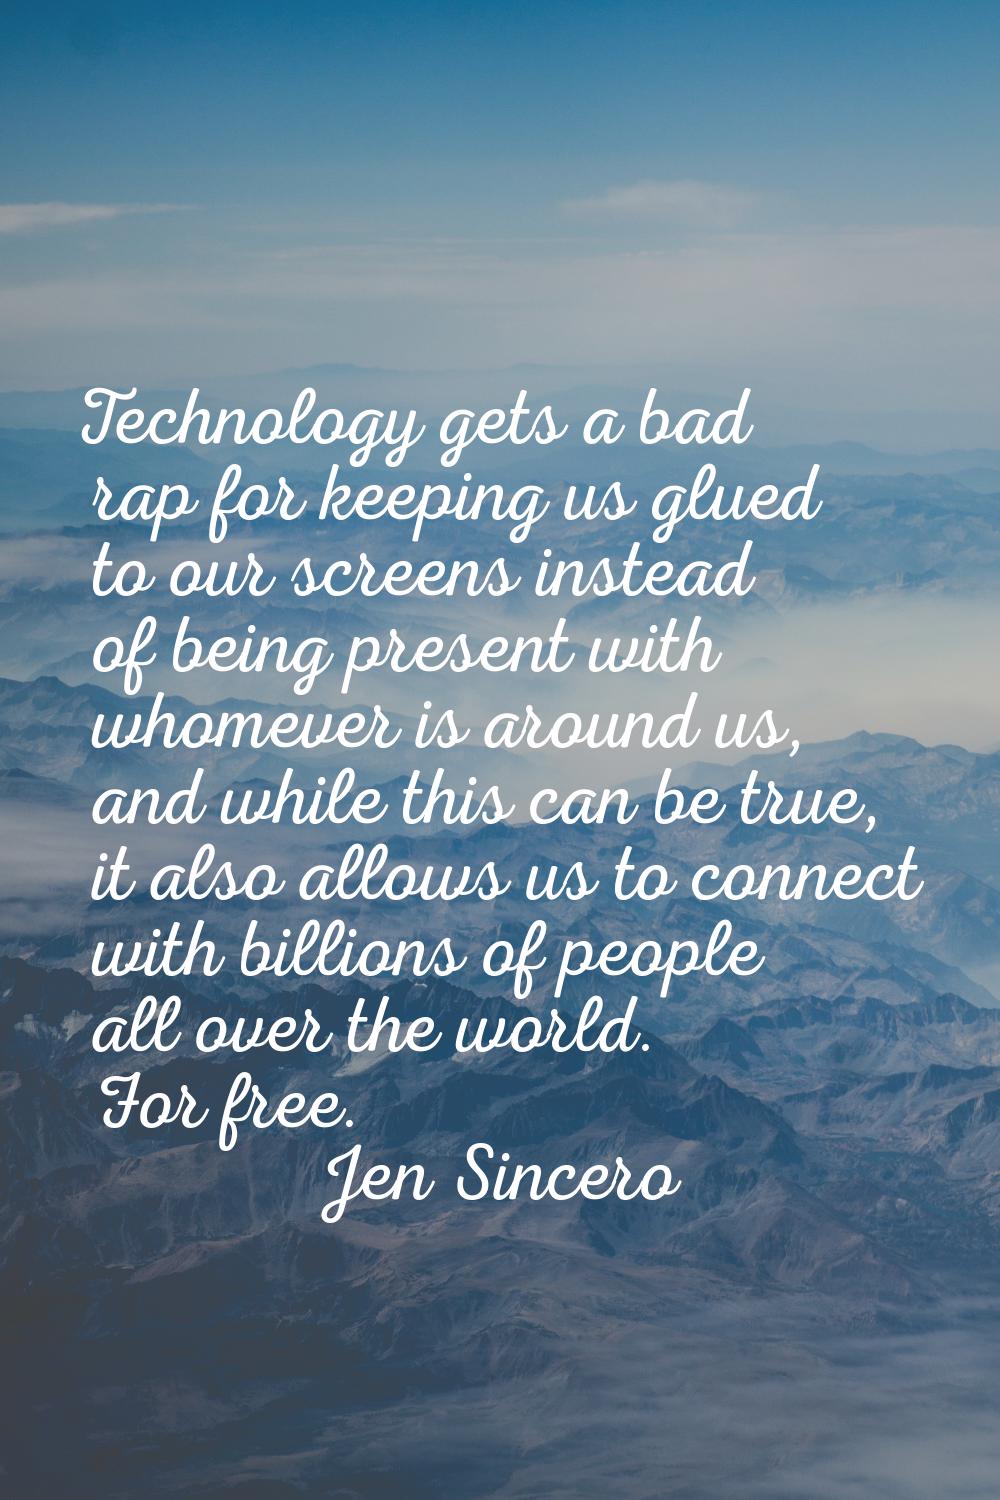 Technology gets a bad rap for keeping us glued to our screens instead of being present with whomeve